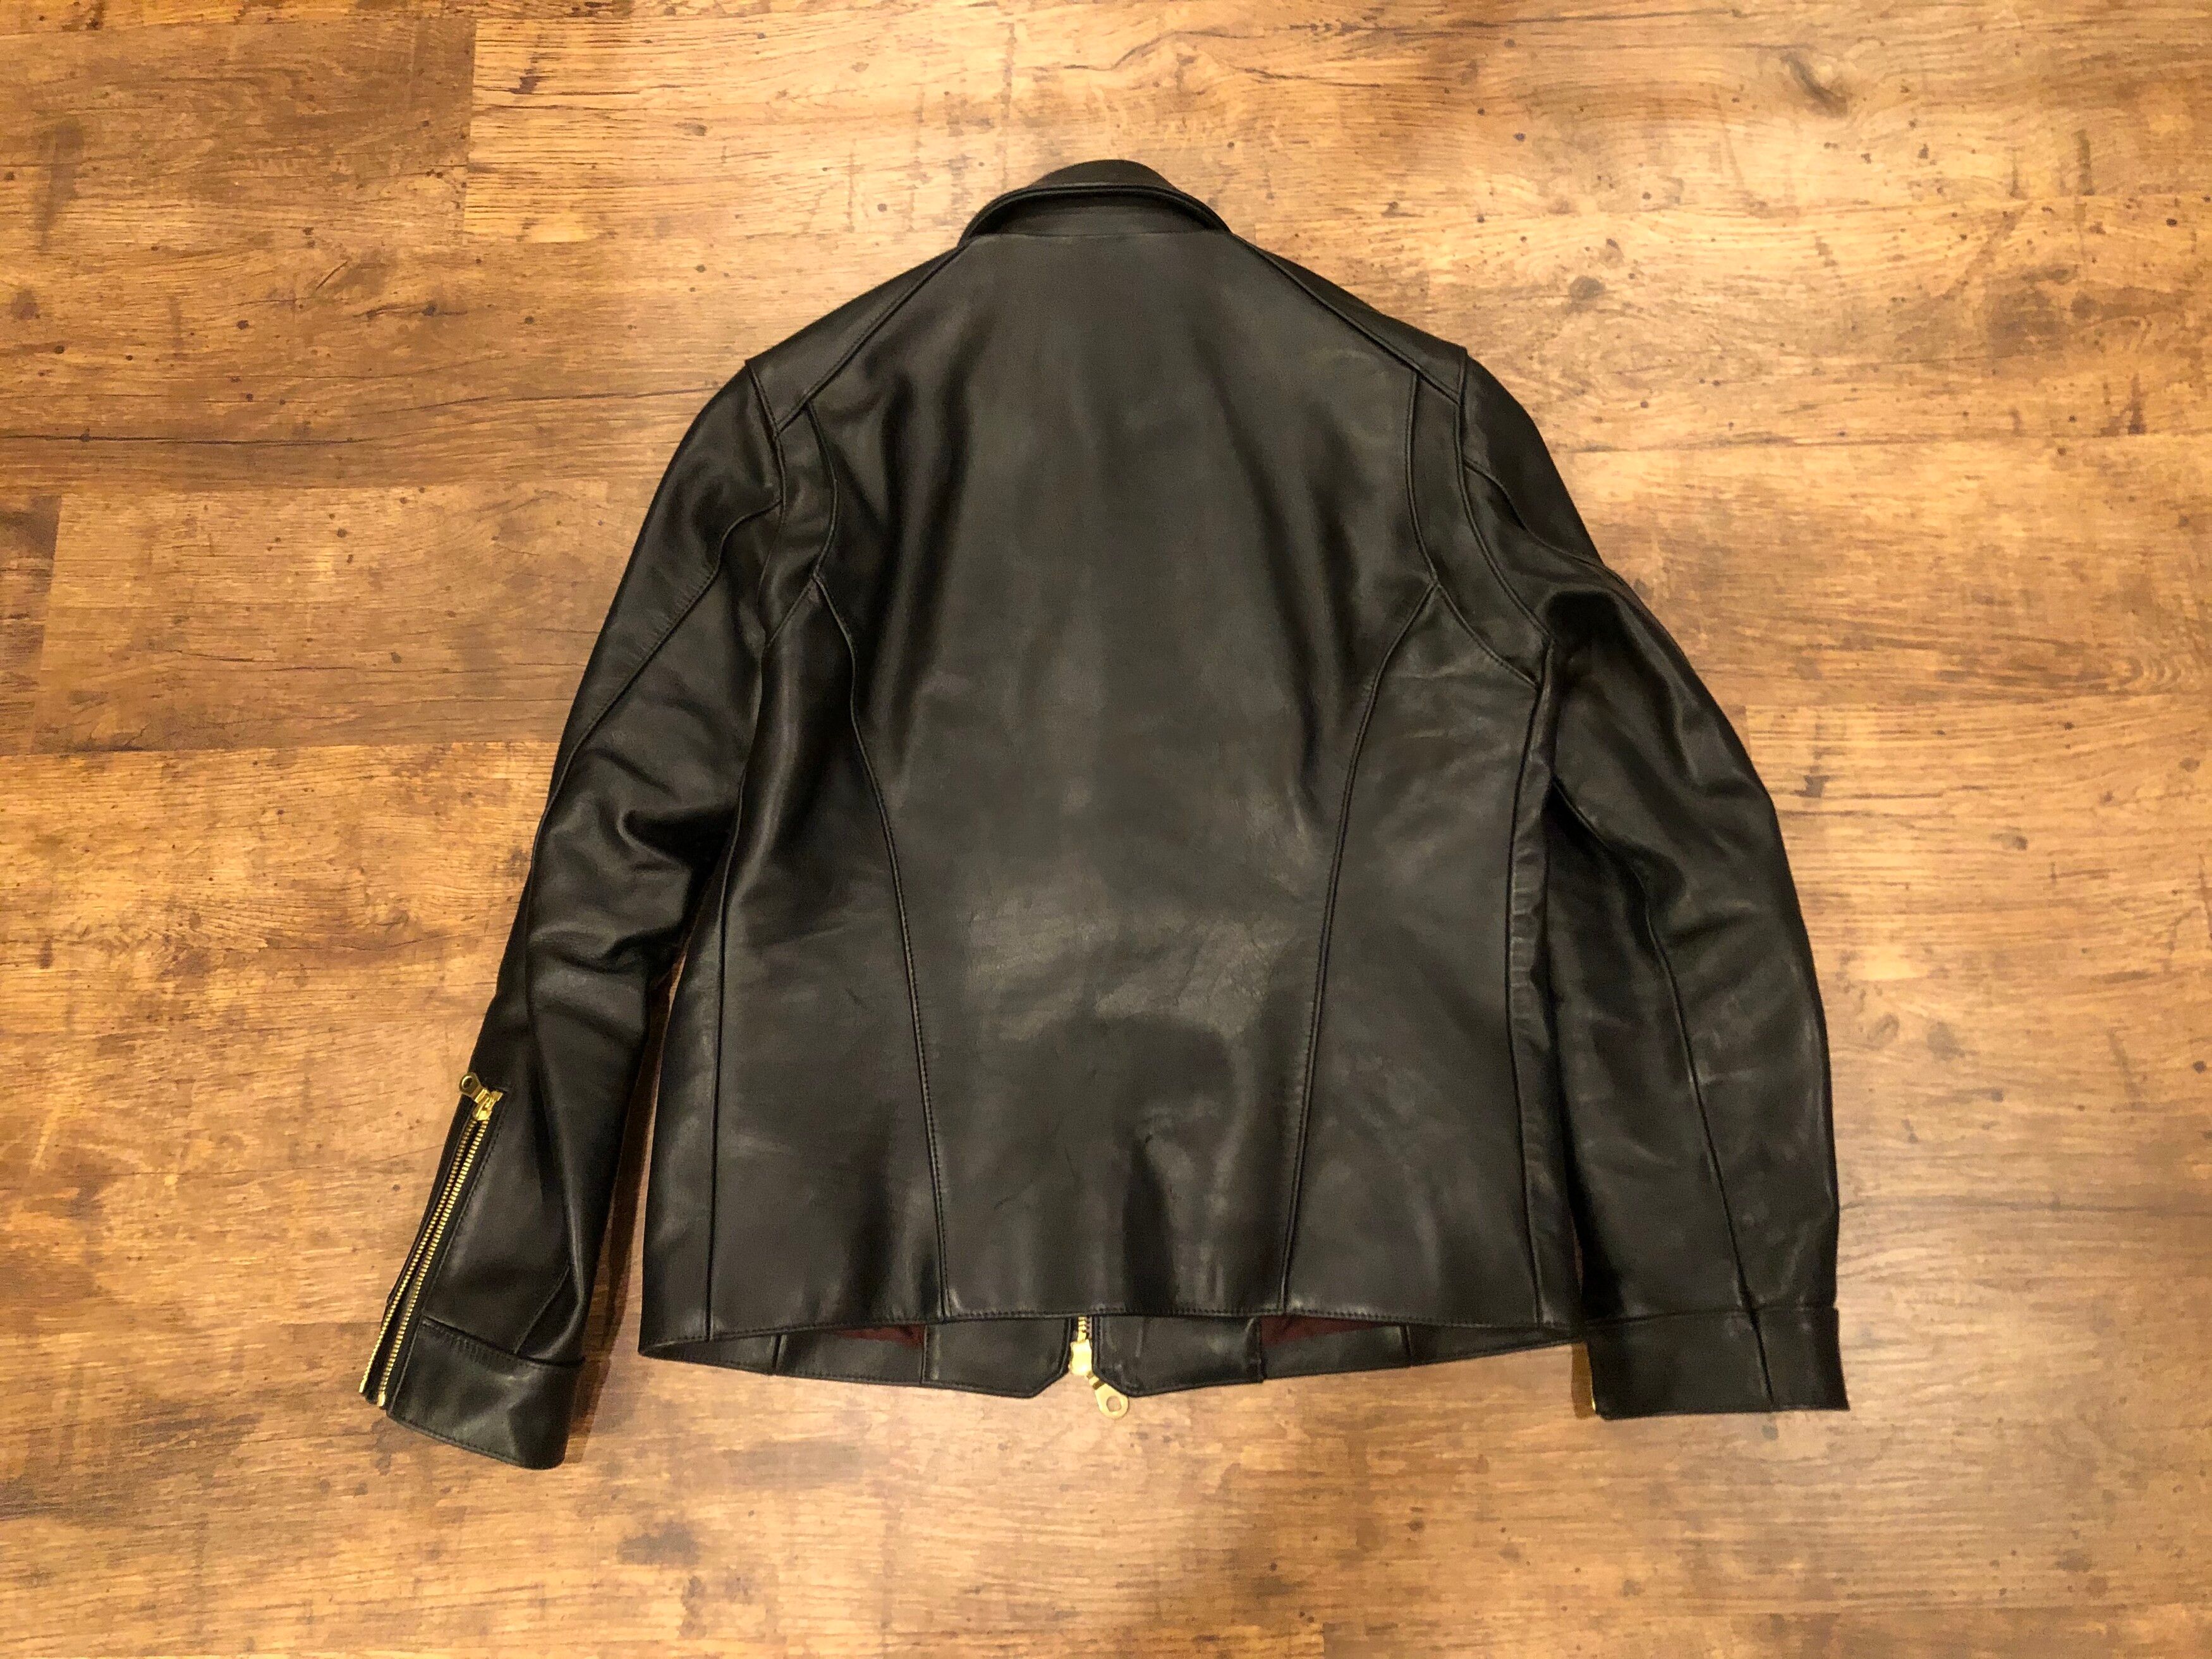 Nine Lives RIDER'S JACKET Sz Small Size US S / EU 44-46 / 1 - 2 Preview